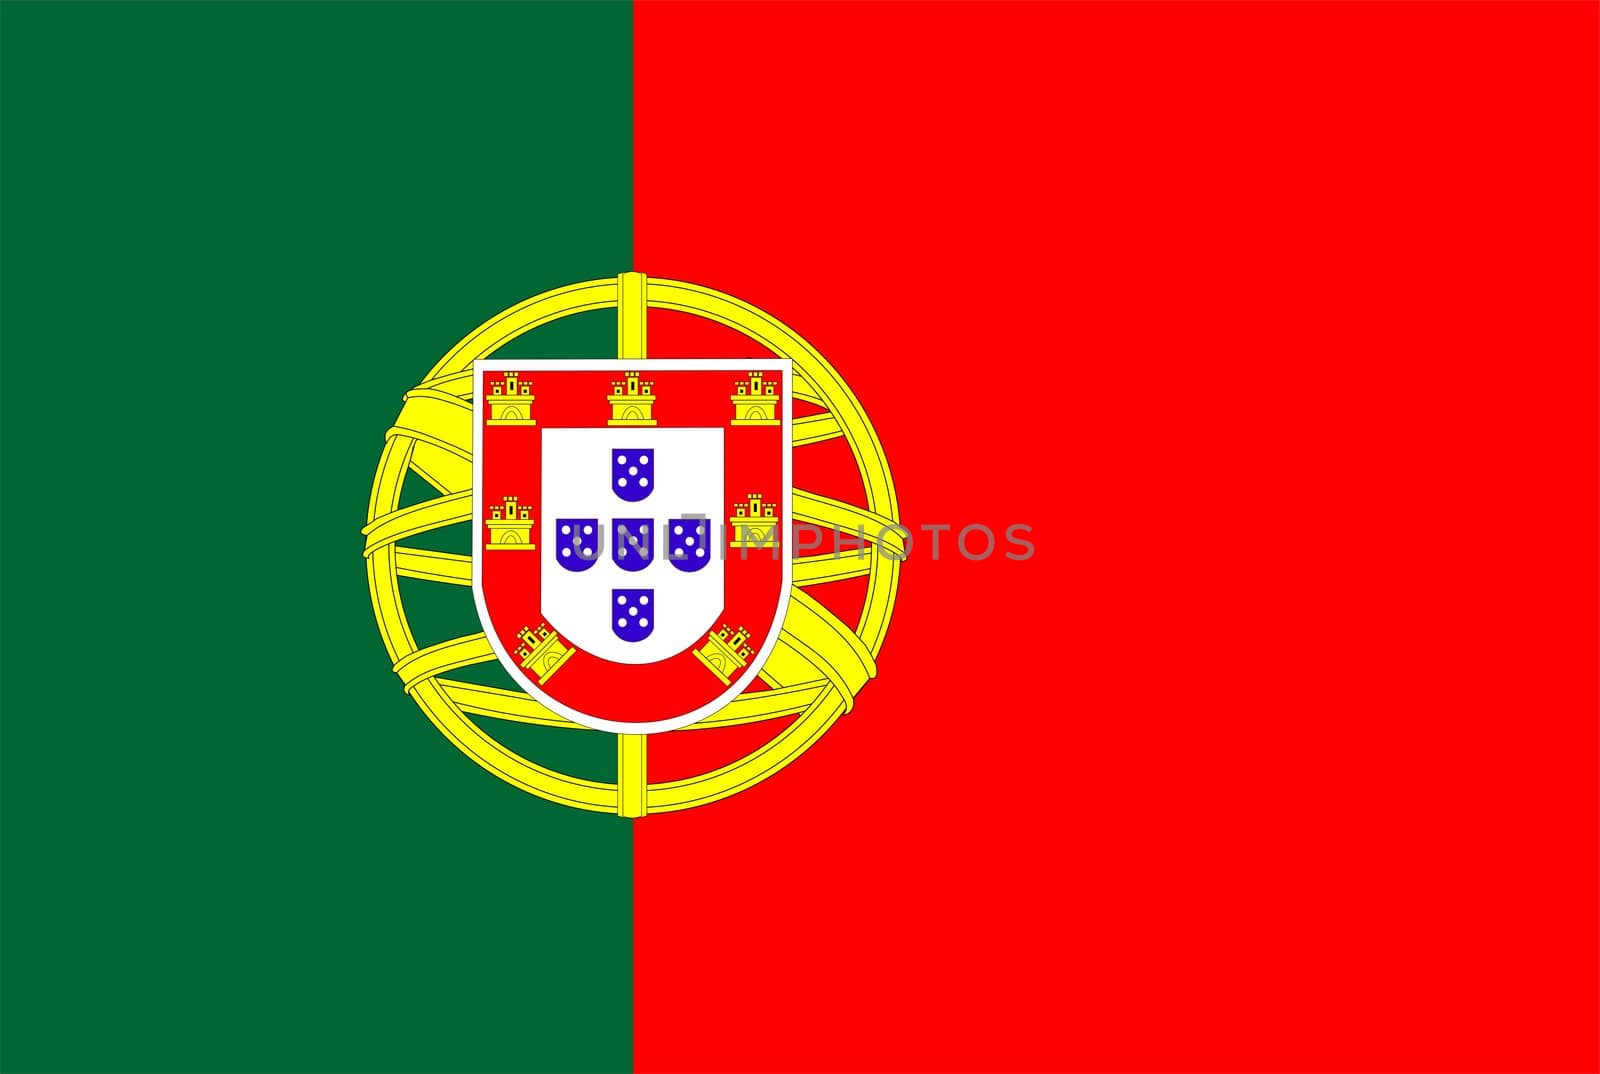 2D illustration of the flag of Portugal